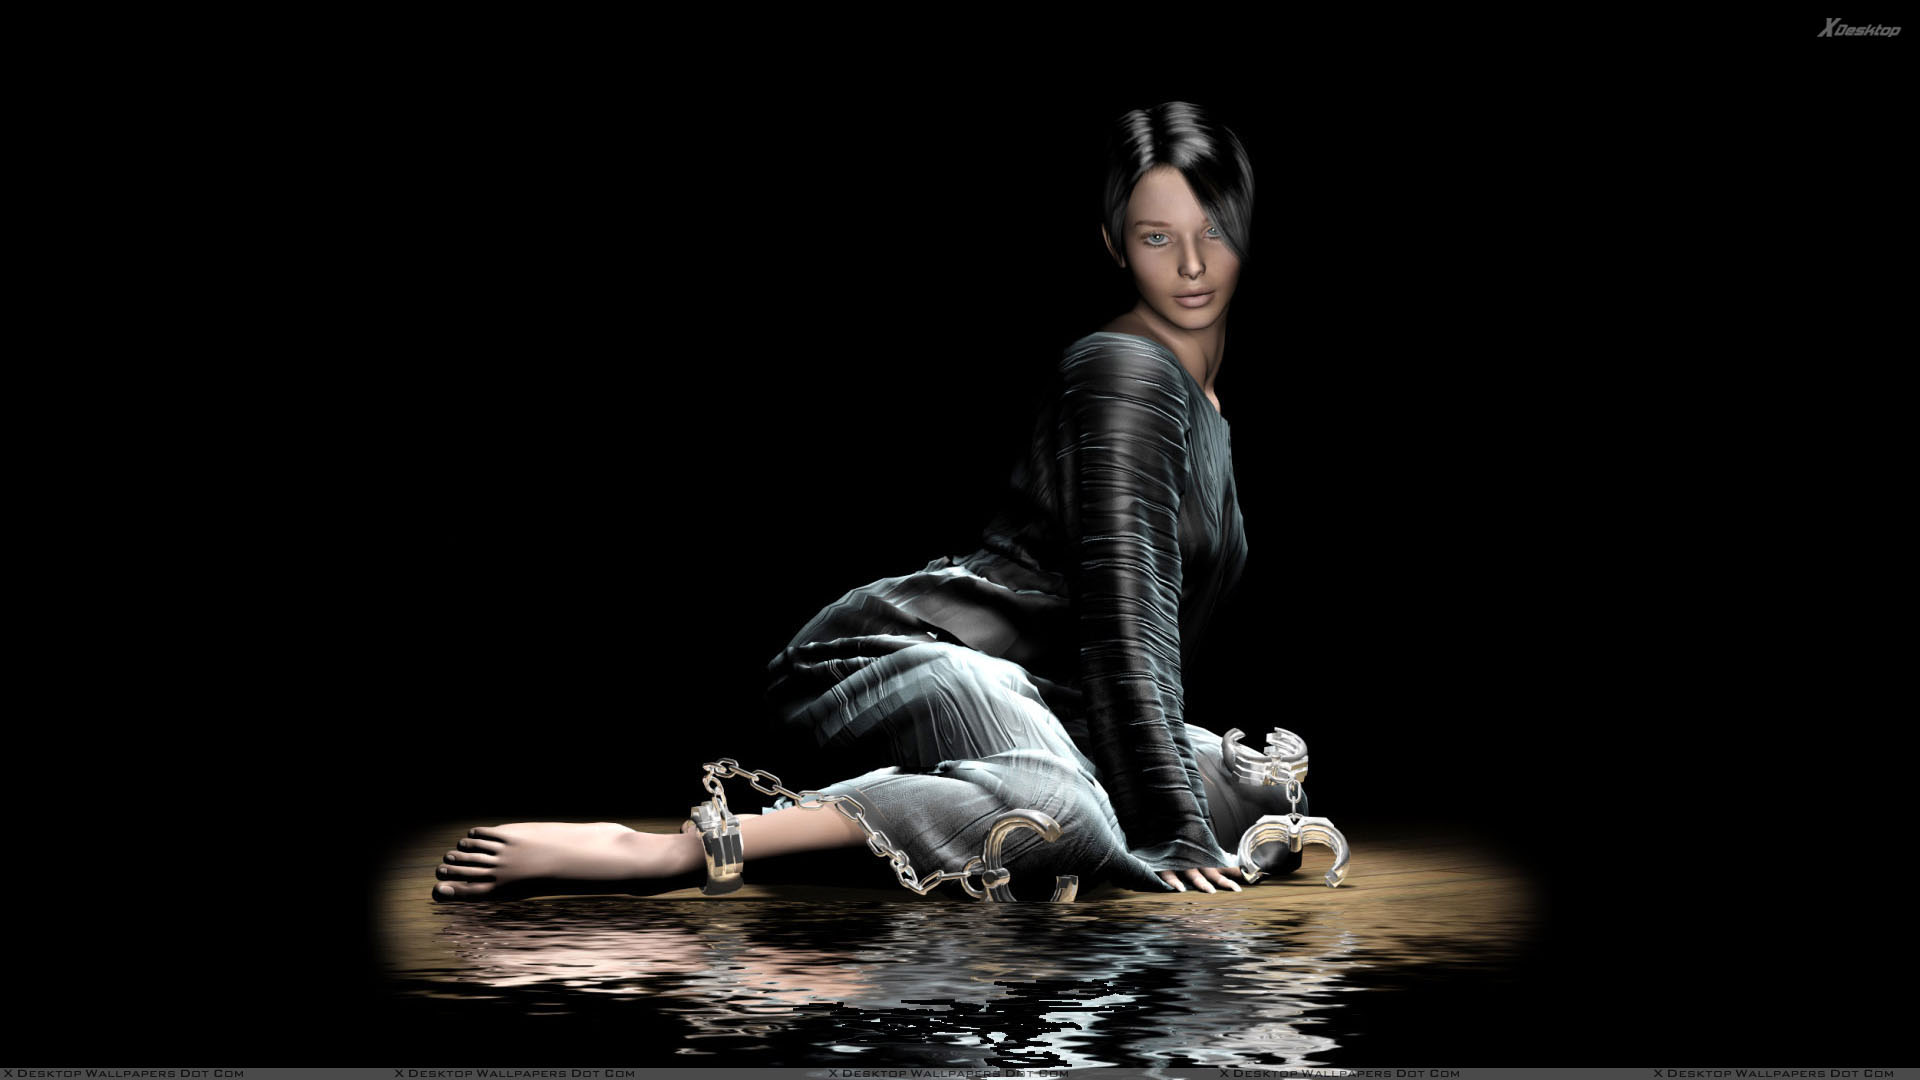 3d Girl Sitting In Water In Black Dress And Black Background Wallpaper